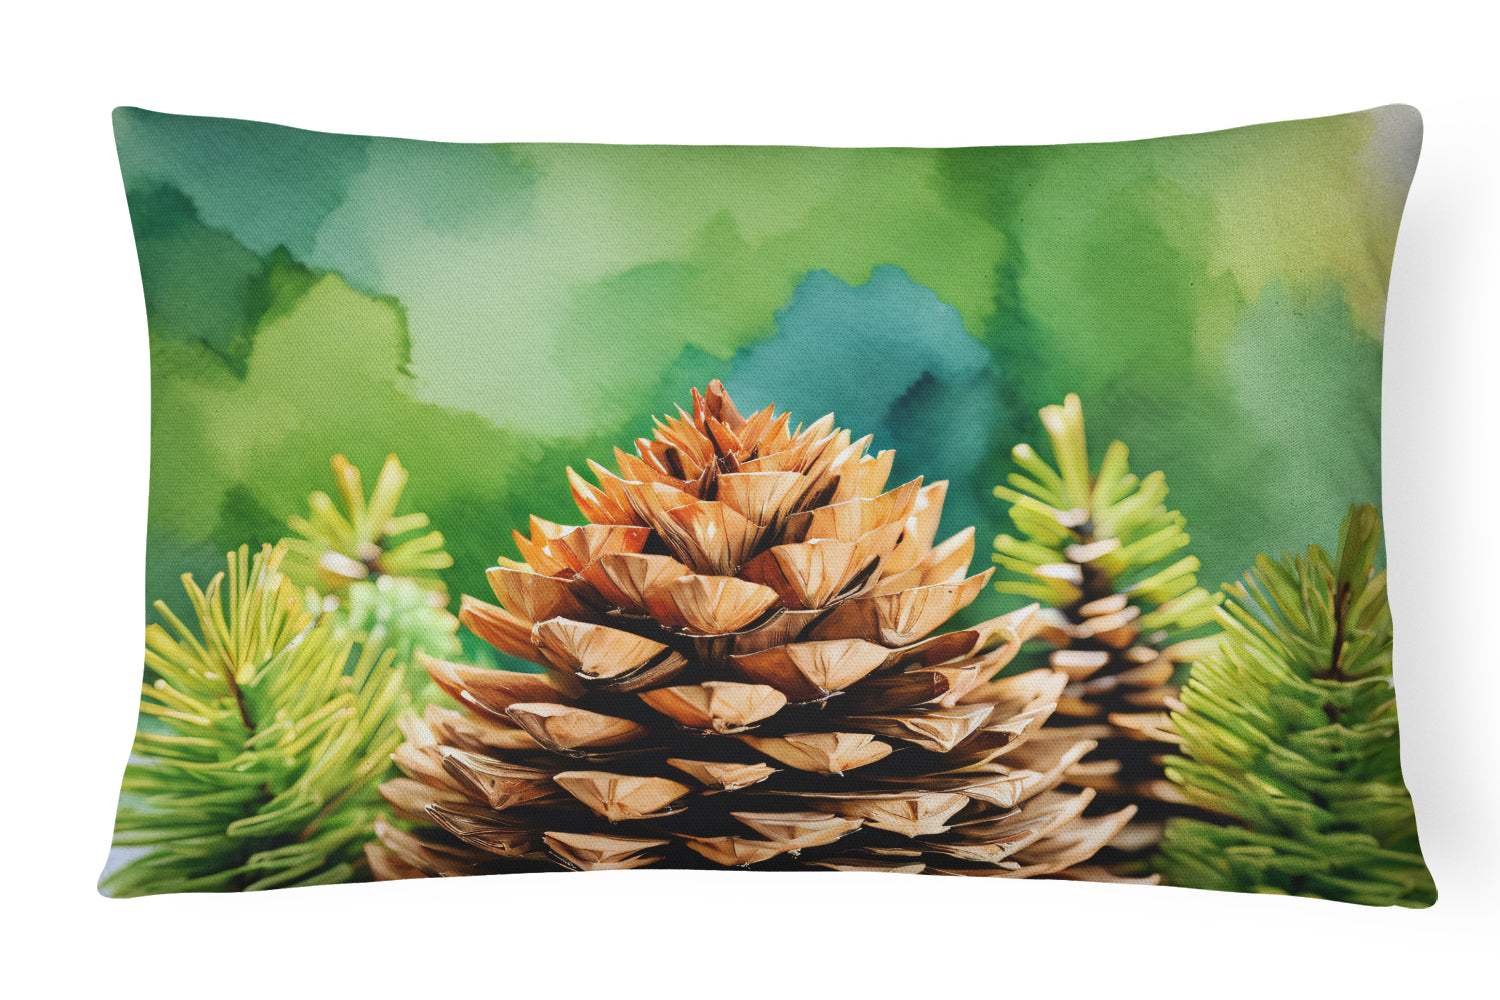 Buy this Maine White Pine Cone and Tassels in Watercolor Fabric Decorative Pillow